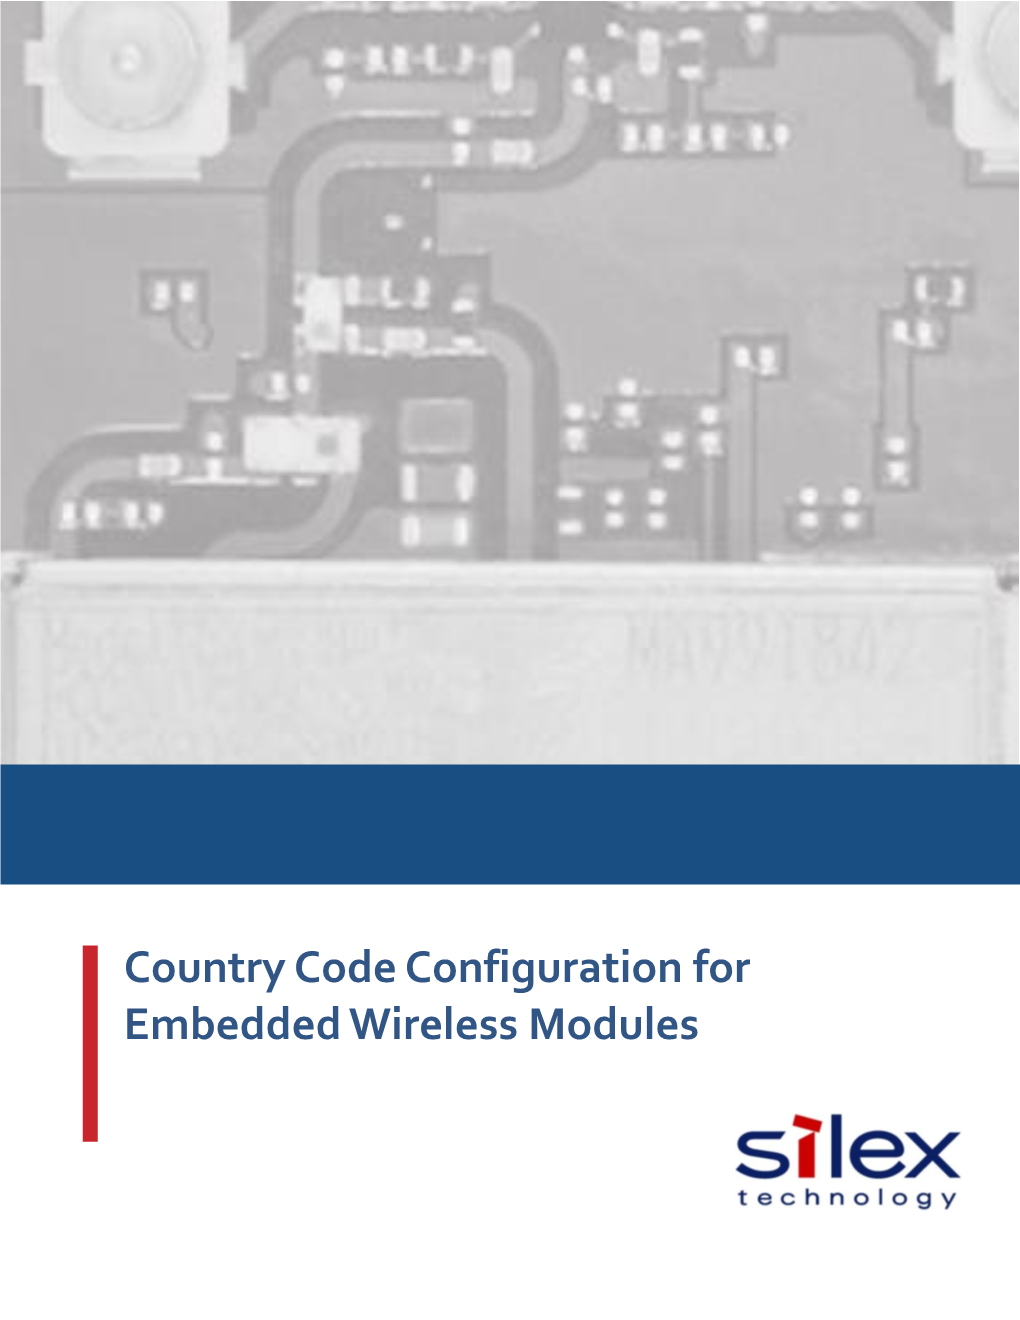 Country Code Configuration for Embedded Wireless Modules